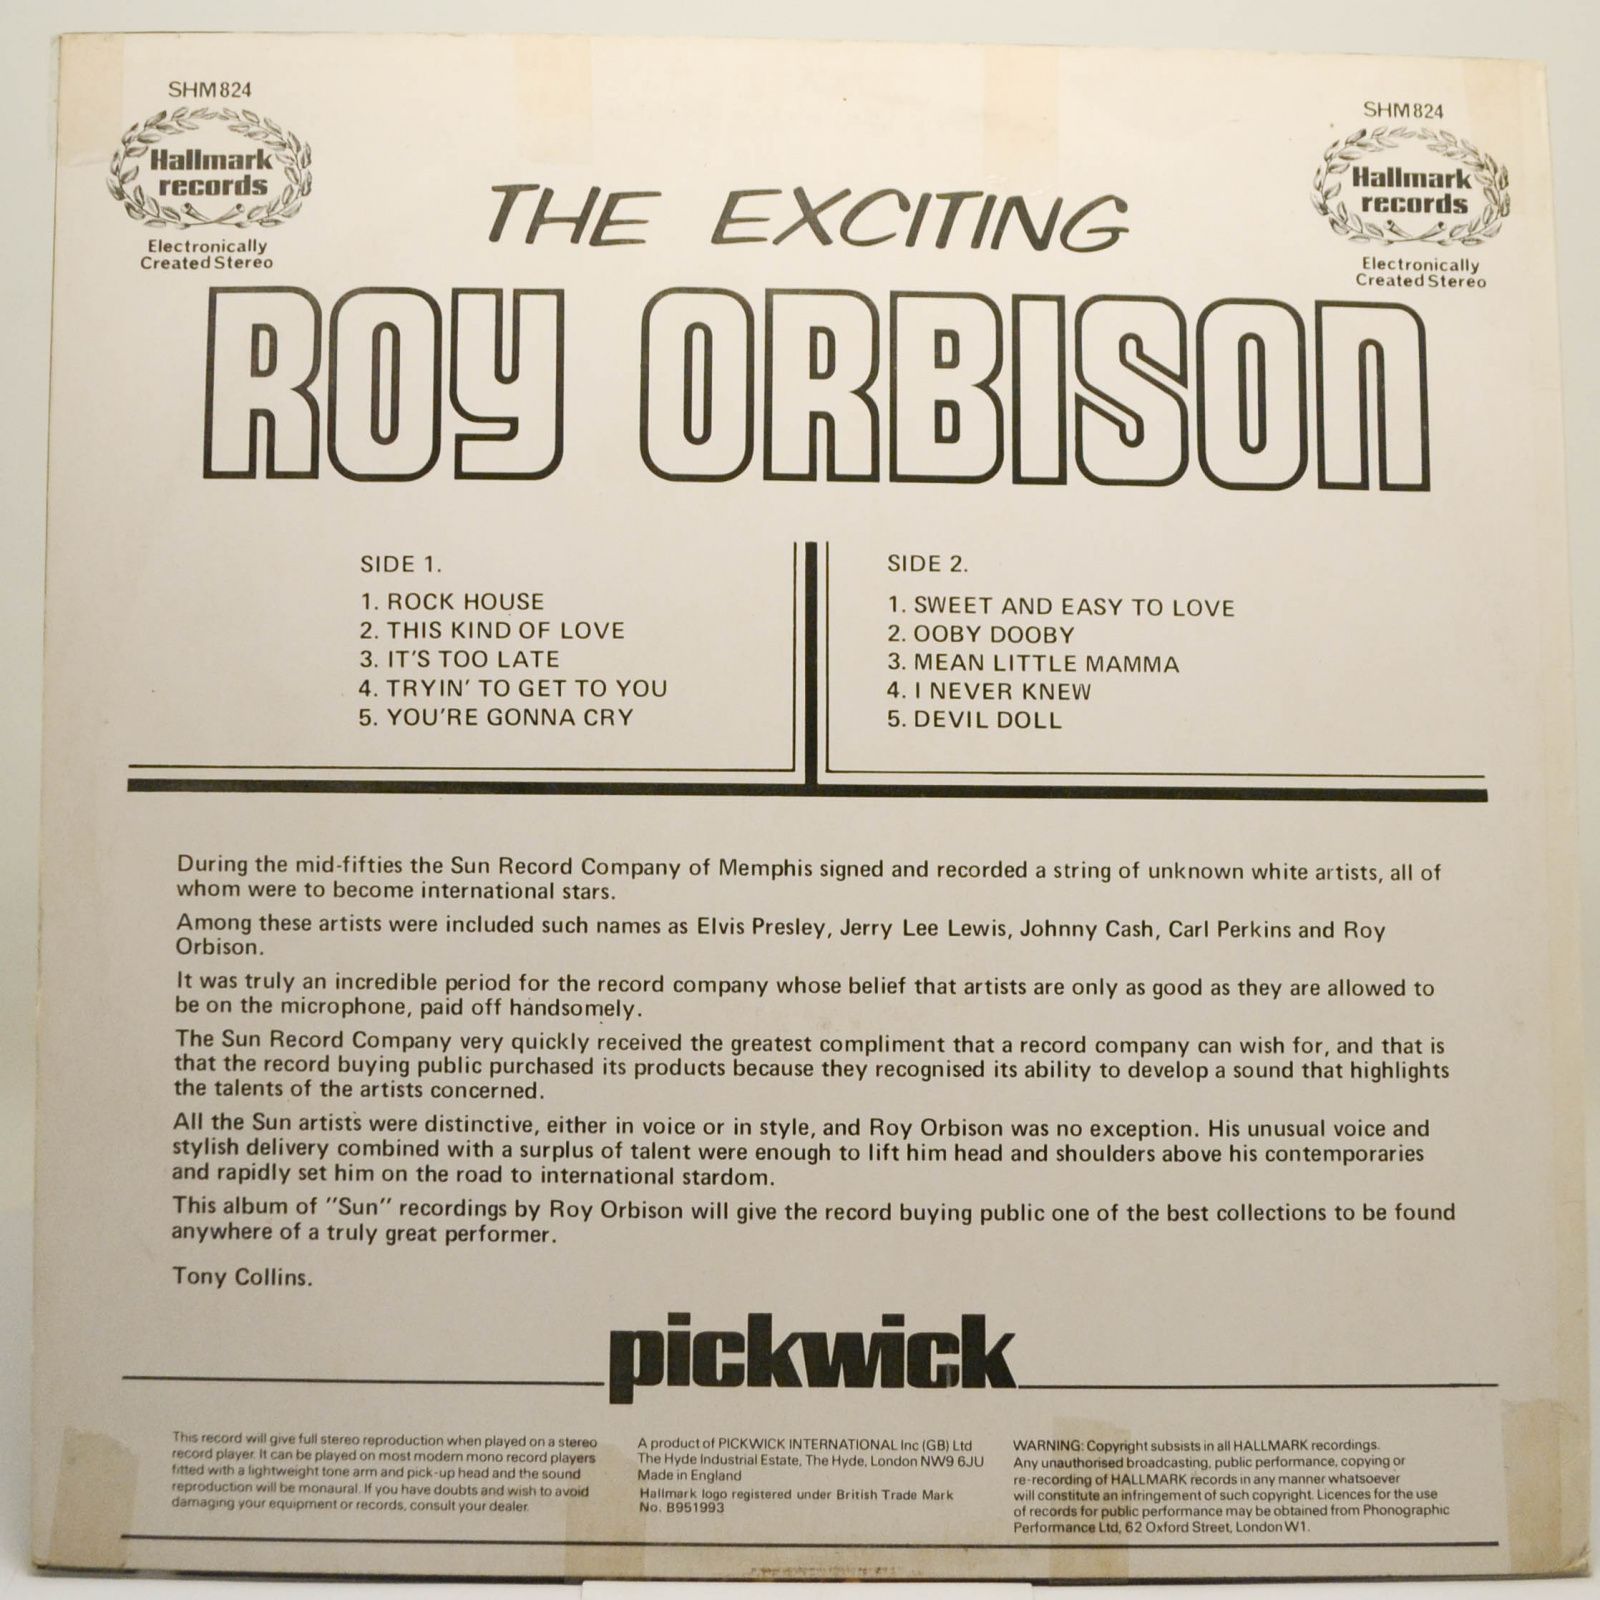 Roy Orbison — The Exciting Roy Orbison, 1974